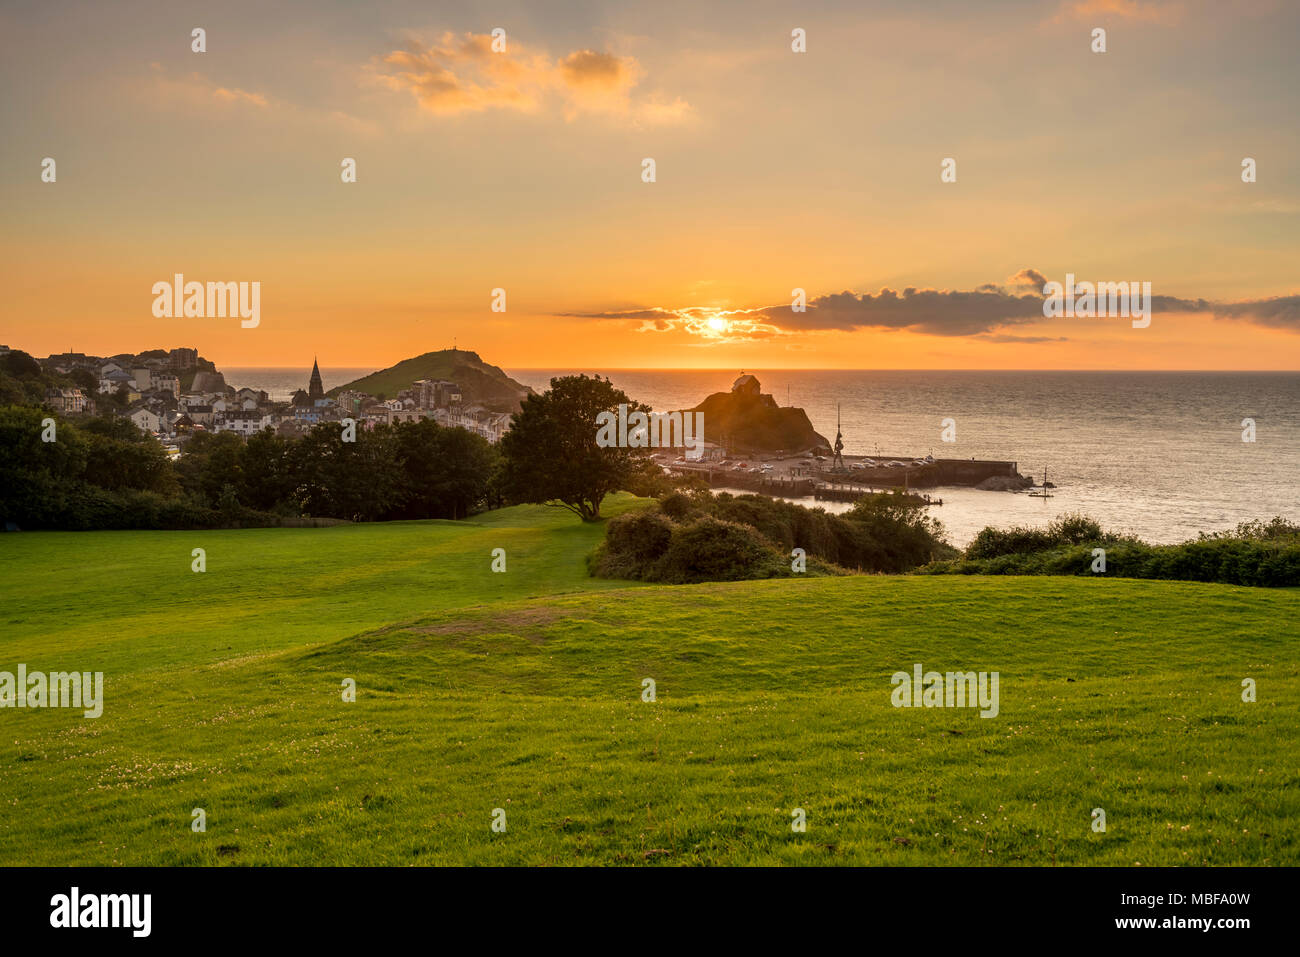 Ilfracombe, Devon at sunset with view over the harbour and town, England UK Stock Photo